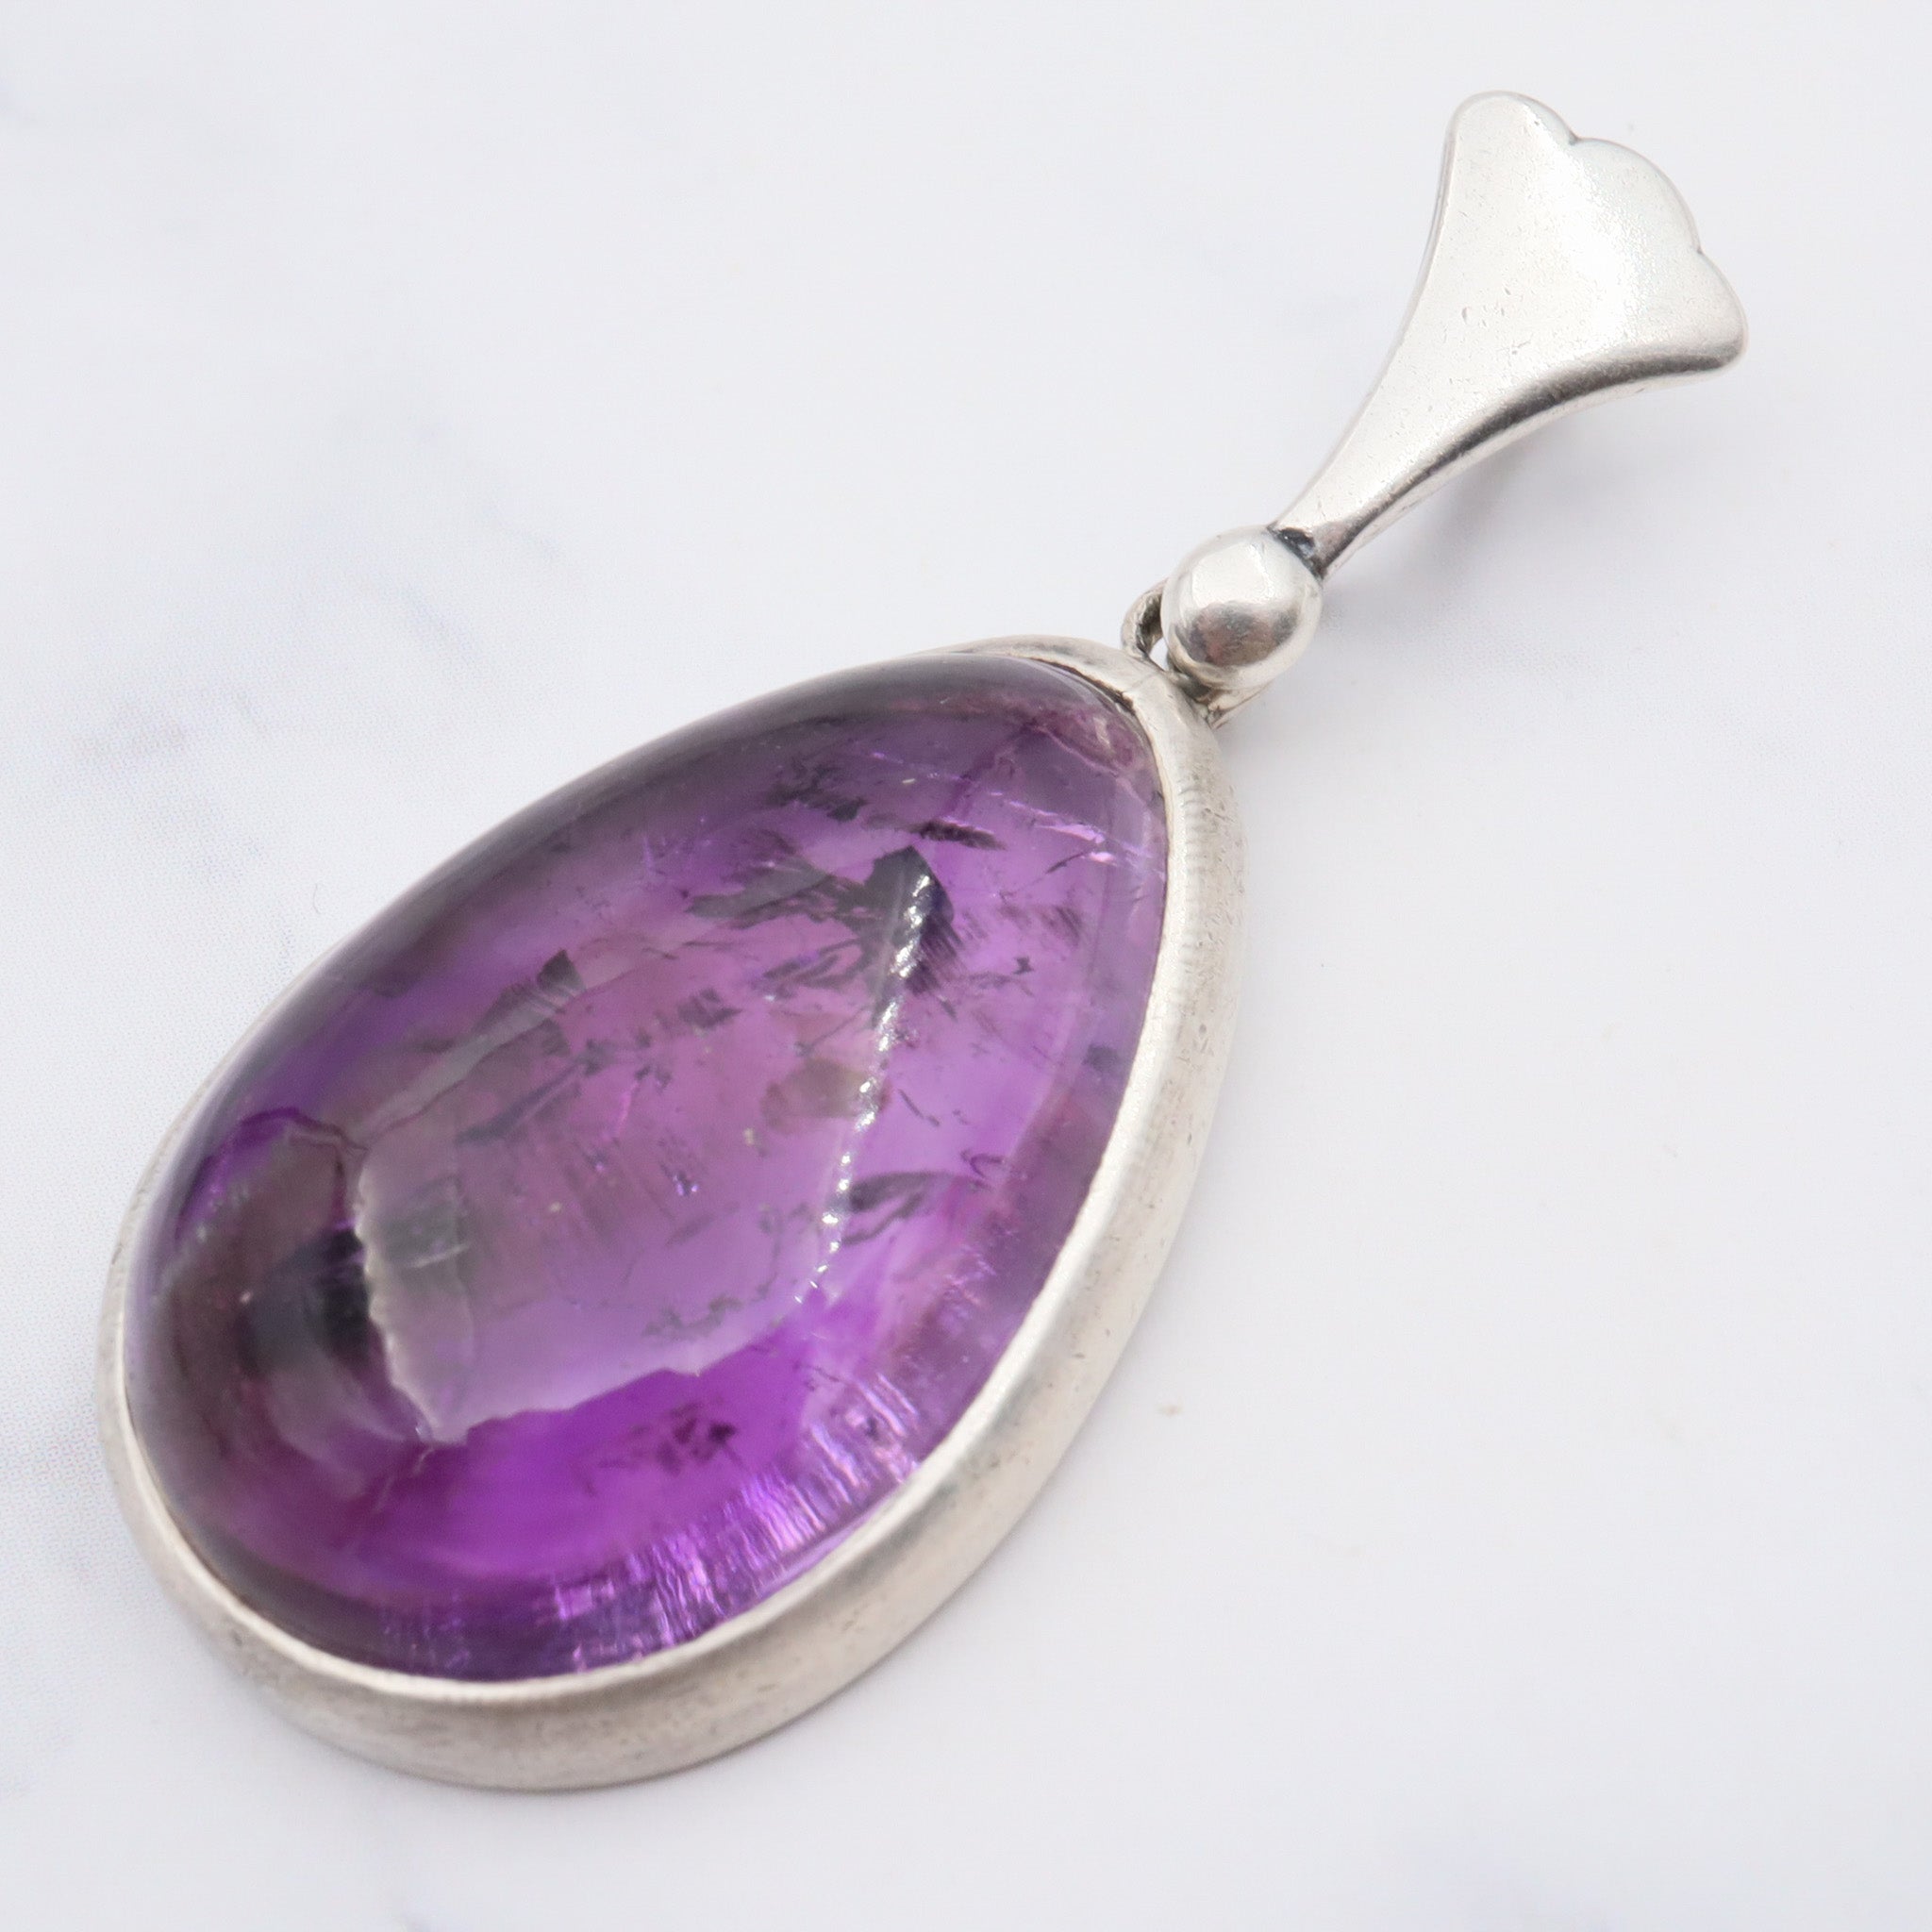 Antique sterling silver and amethyst tear drop pendant